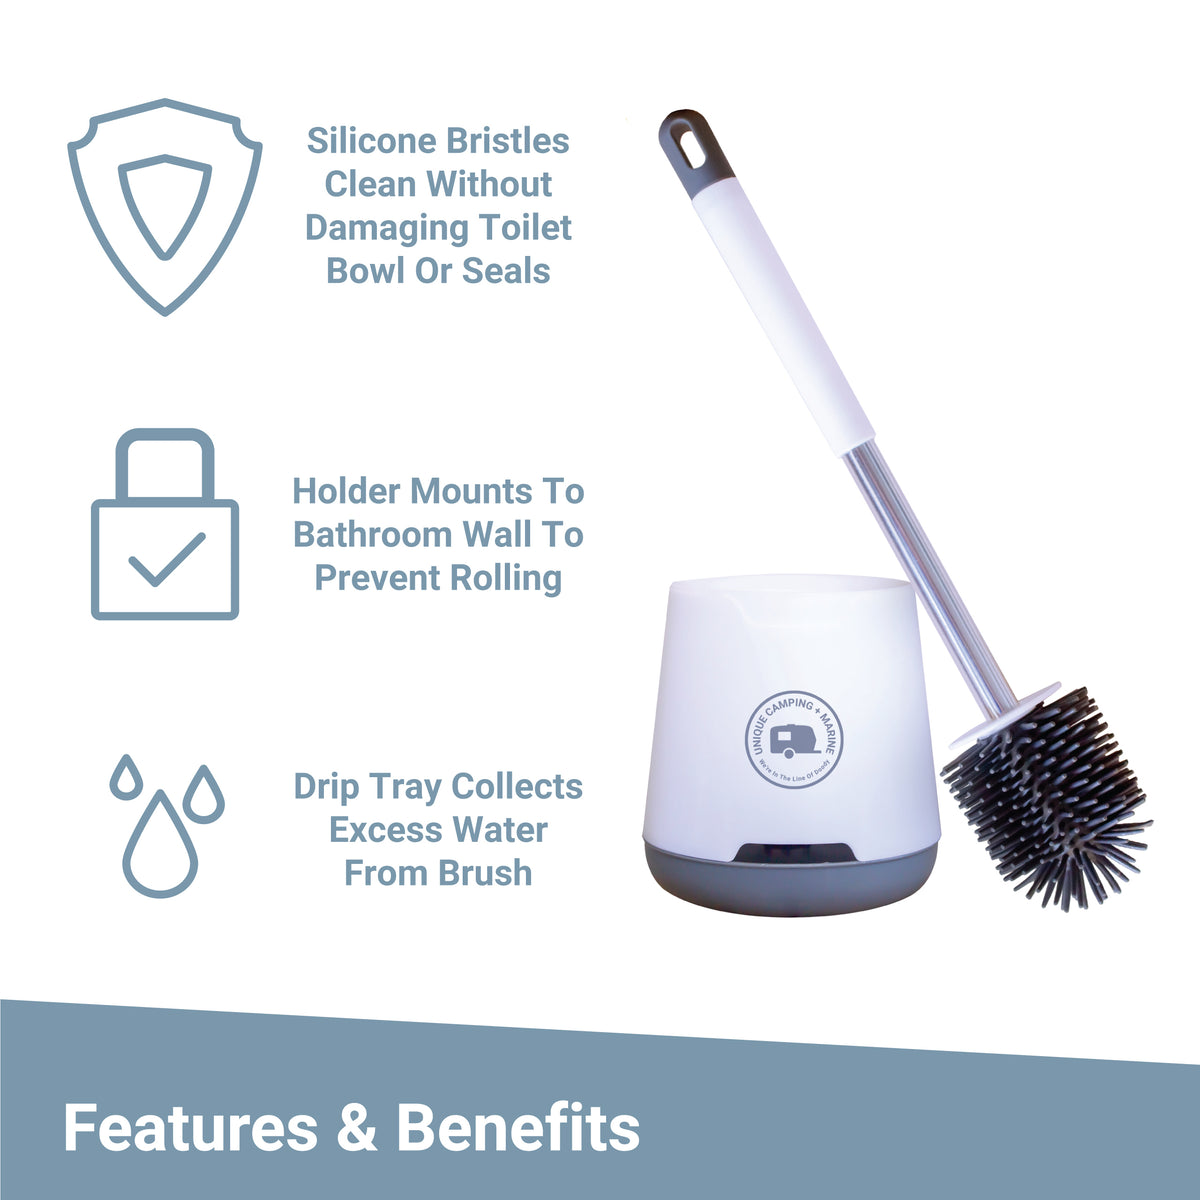 Silicone RV Toielt Brush Features and Benefits. Unique Cmaping + Marine